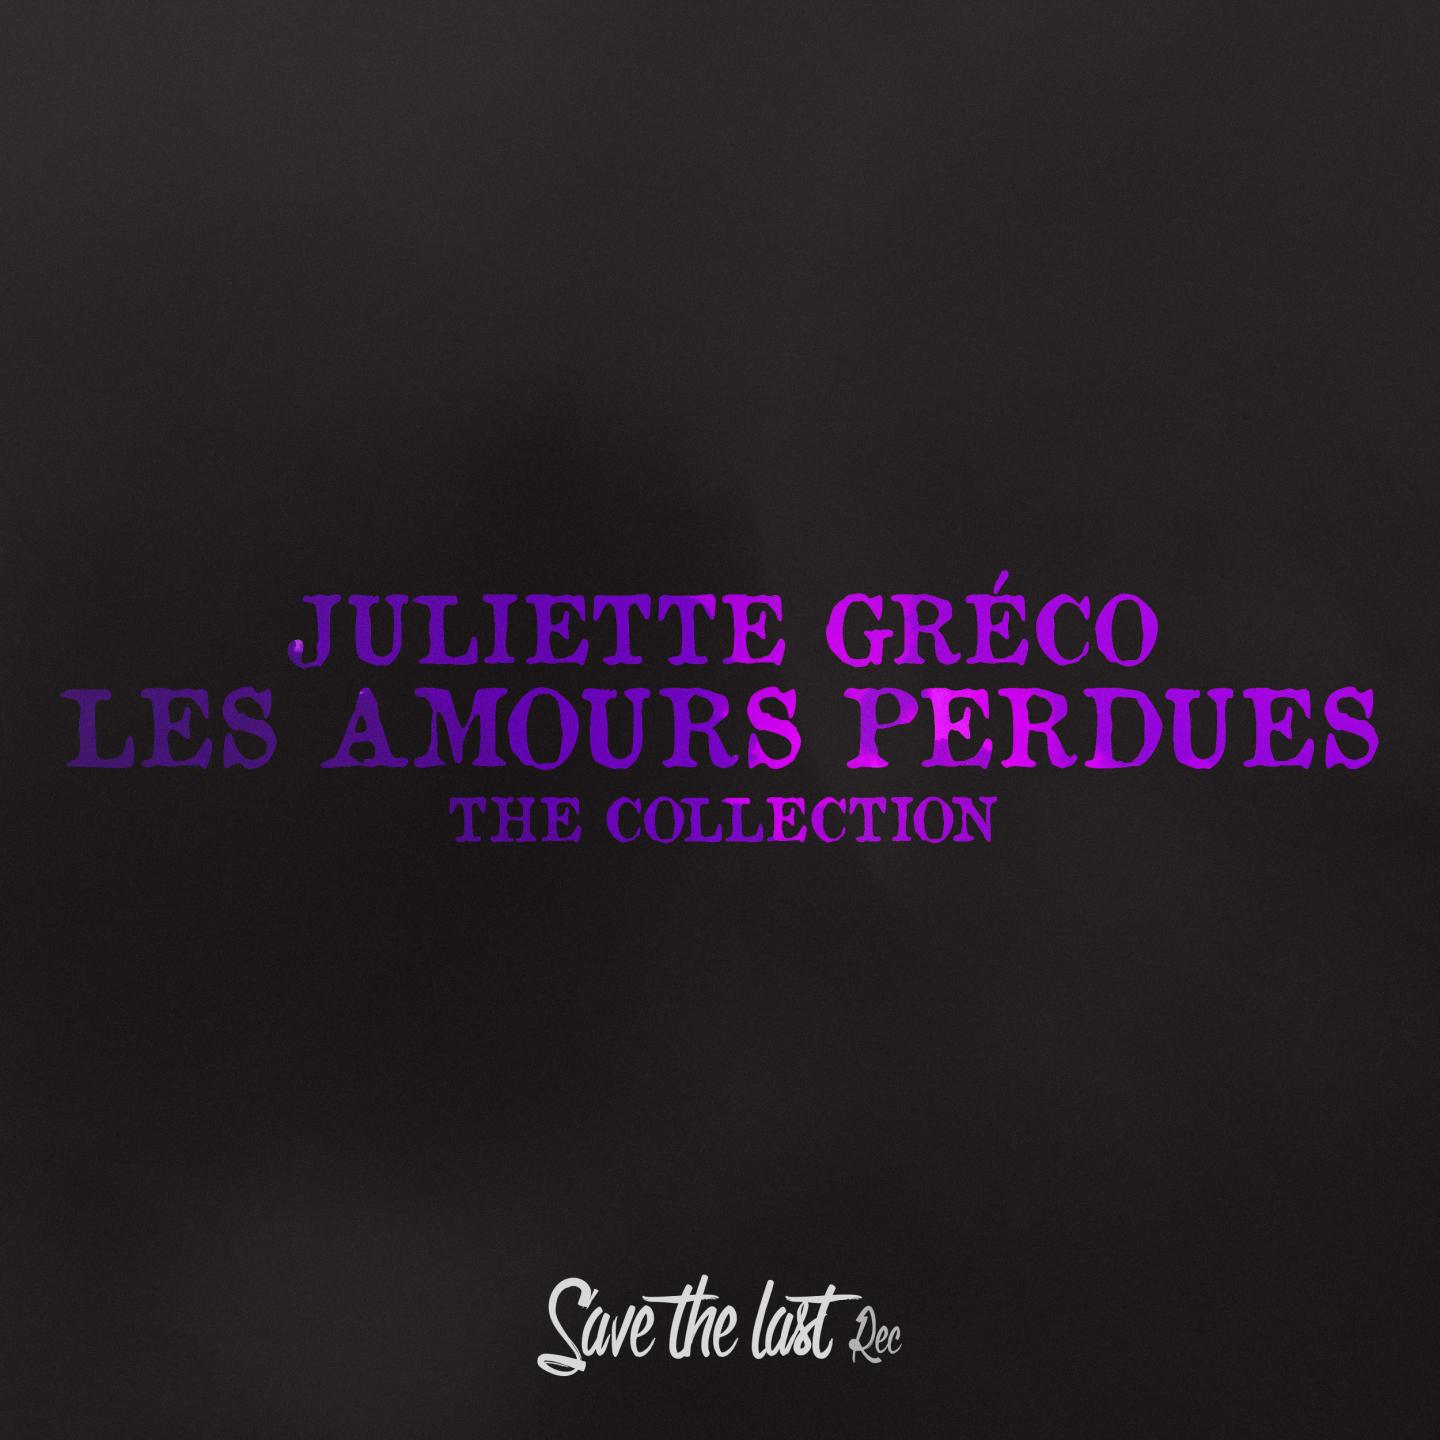 Les amours perdues (The collection)